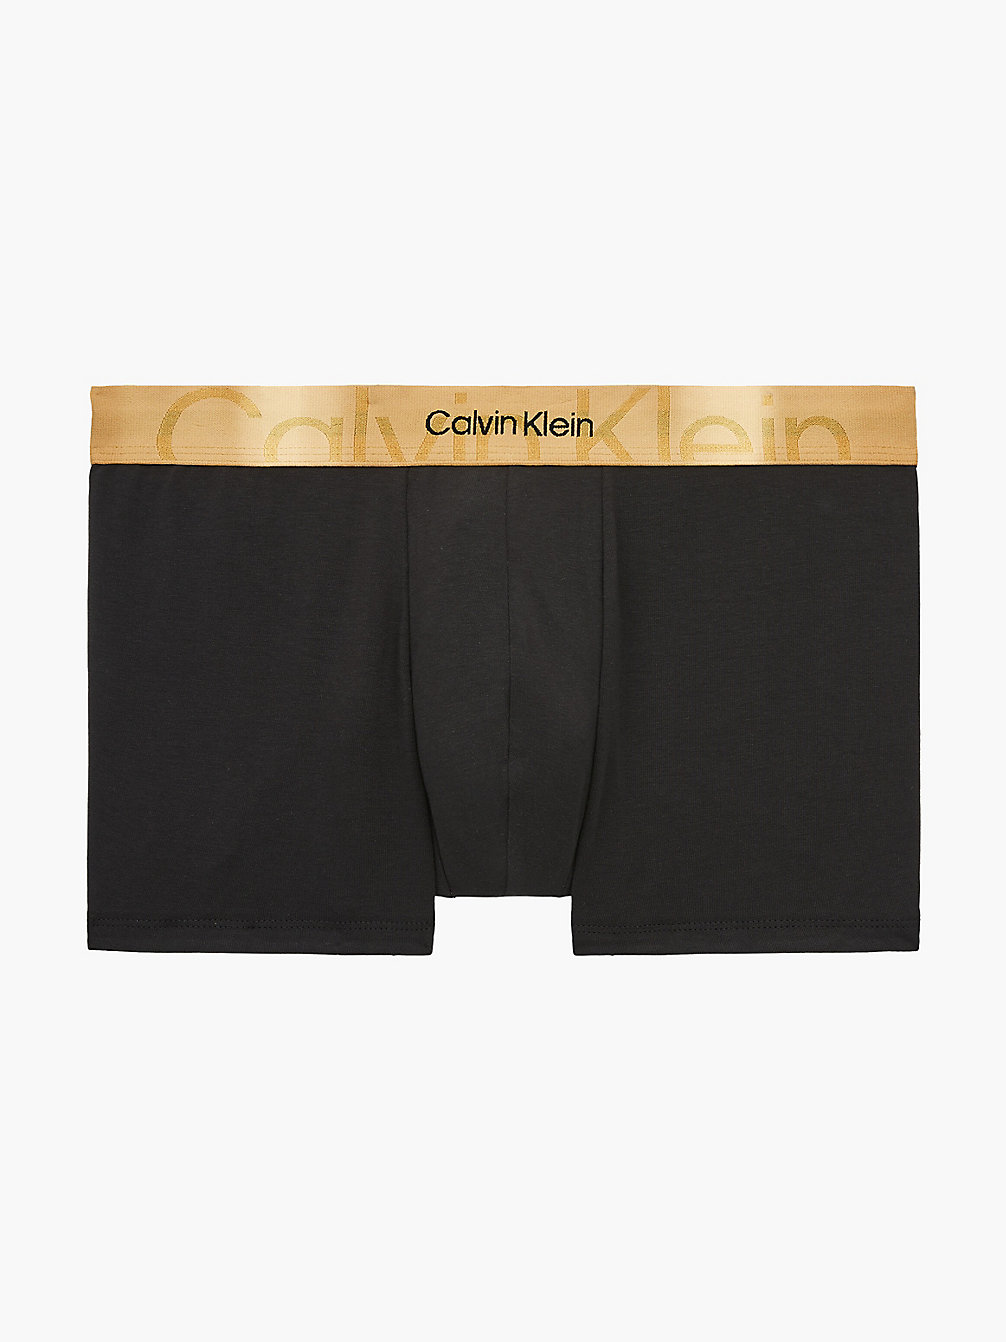 Boxer Aderenti - Embossed Icon > BLACK W/ OLD GOLD WB > undefined uomo > Calvin Klein